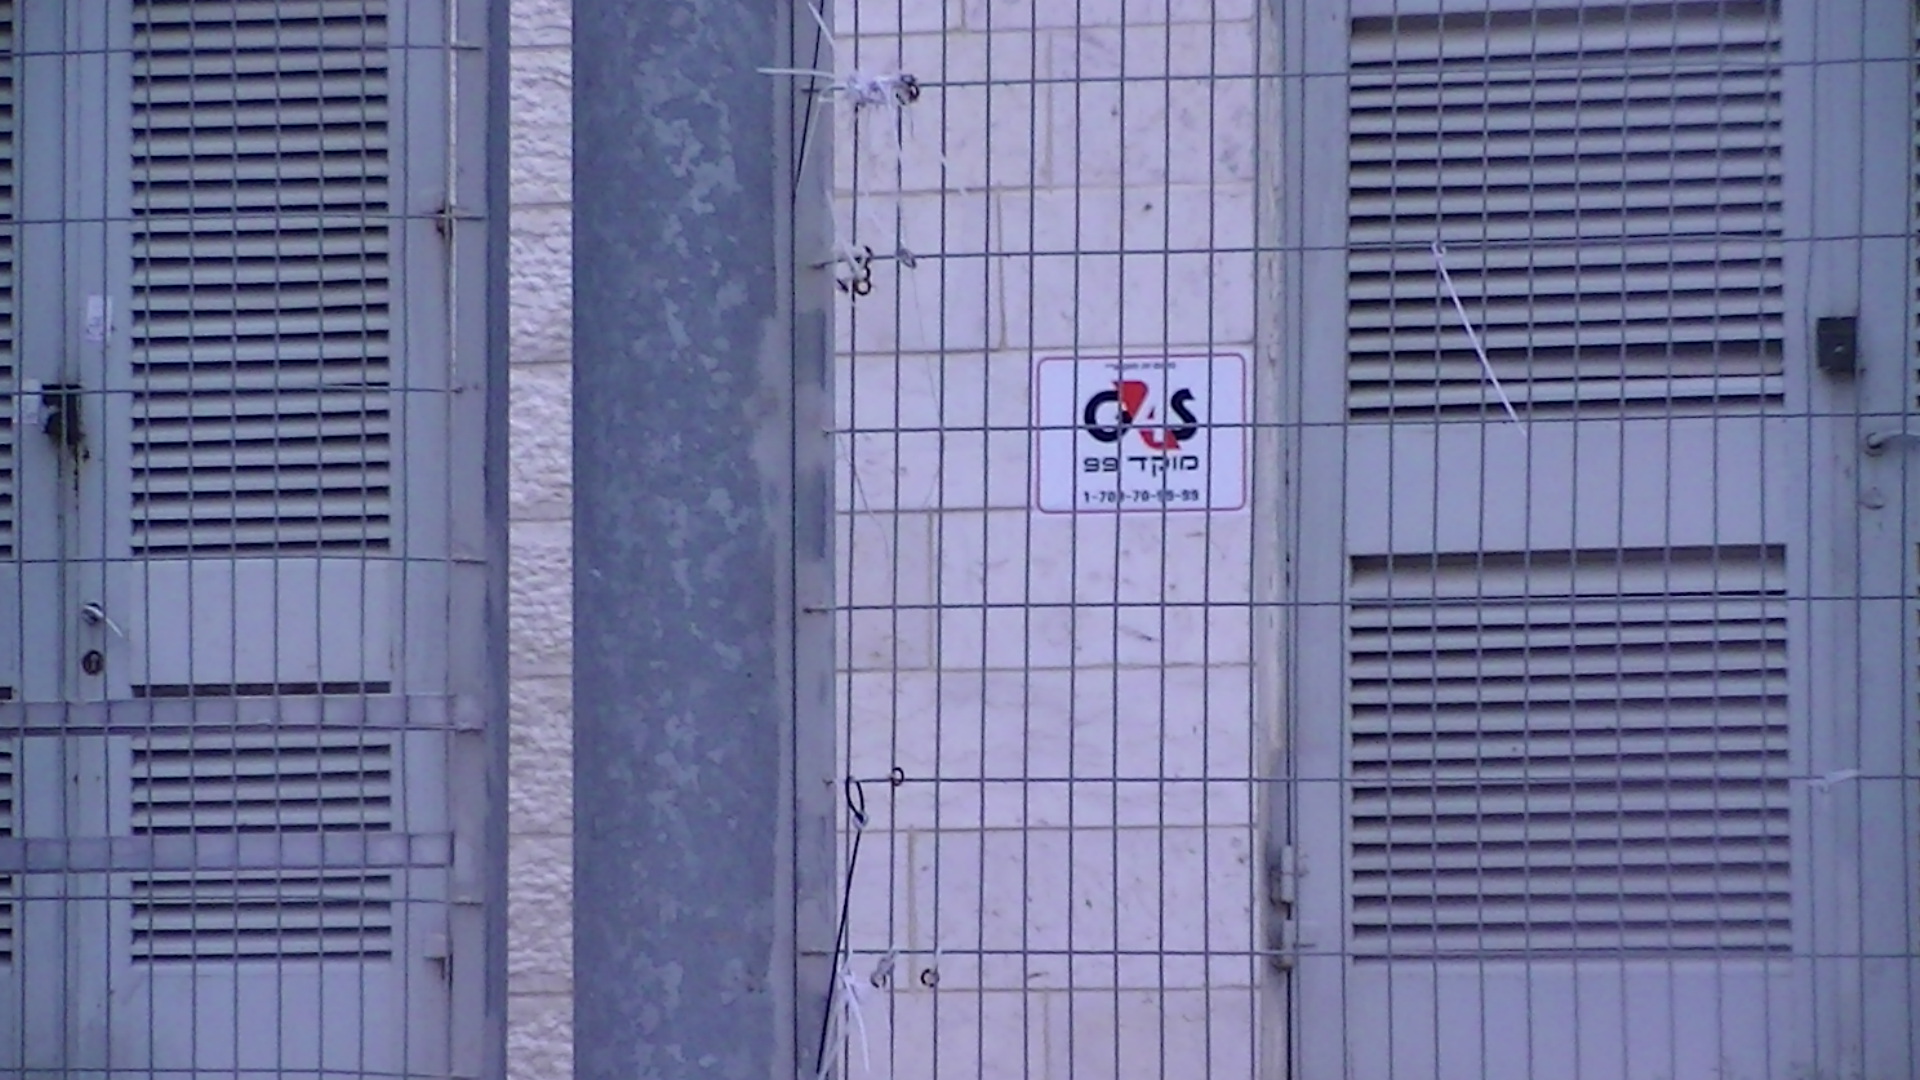 A G4S sign on a road leading to the Gilo military checkpoint, photo taken by Corporate Watch researchers 04/02/2013